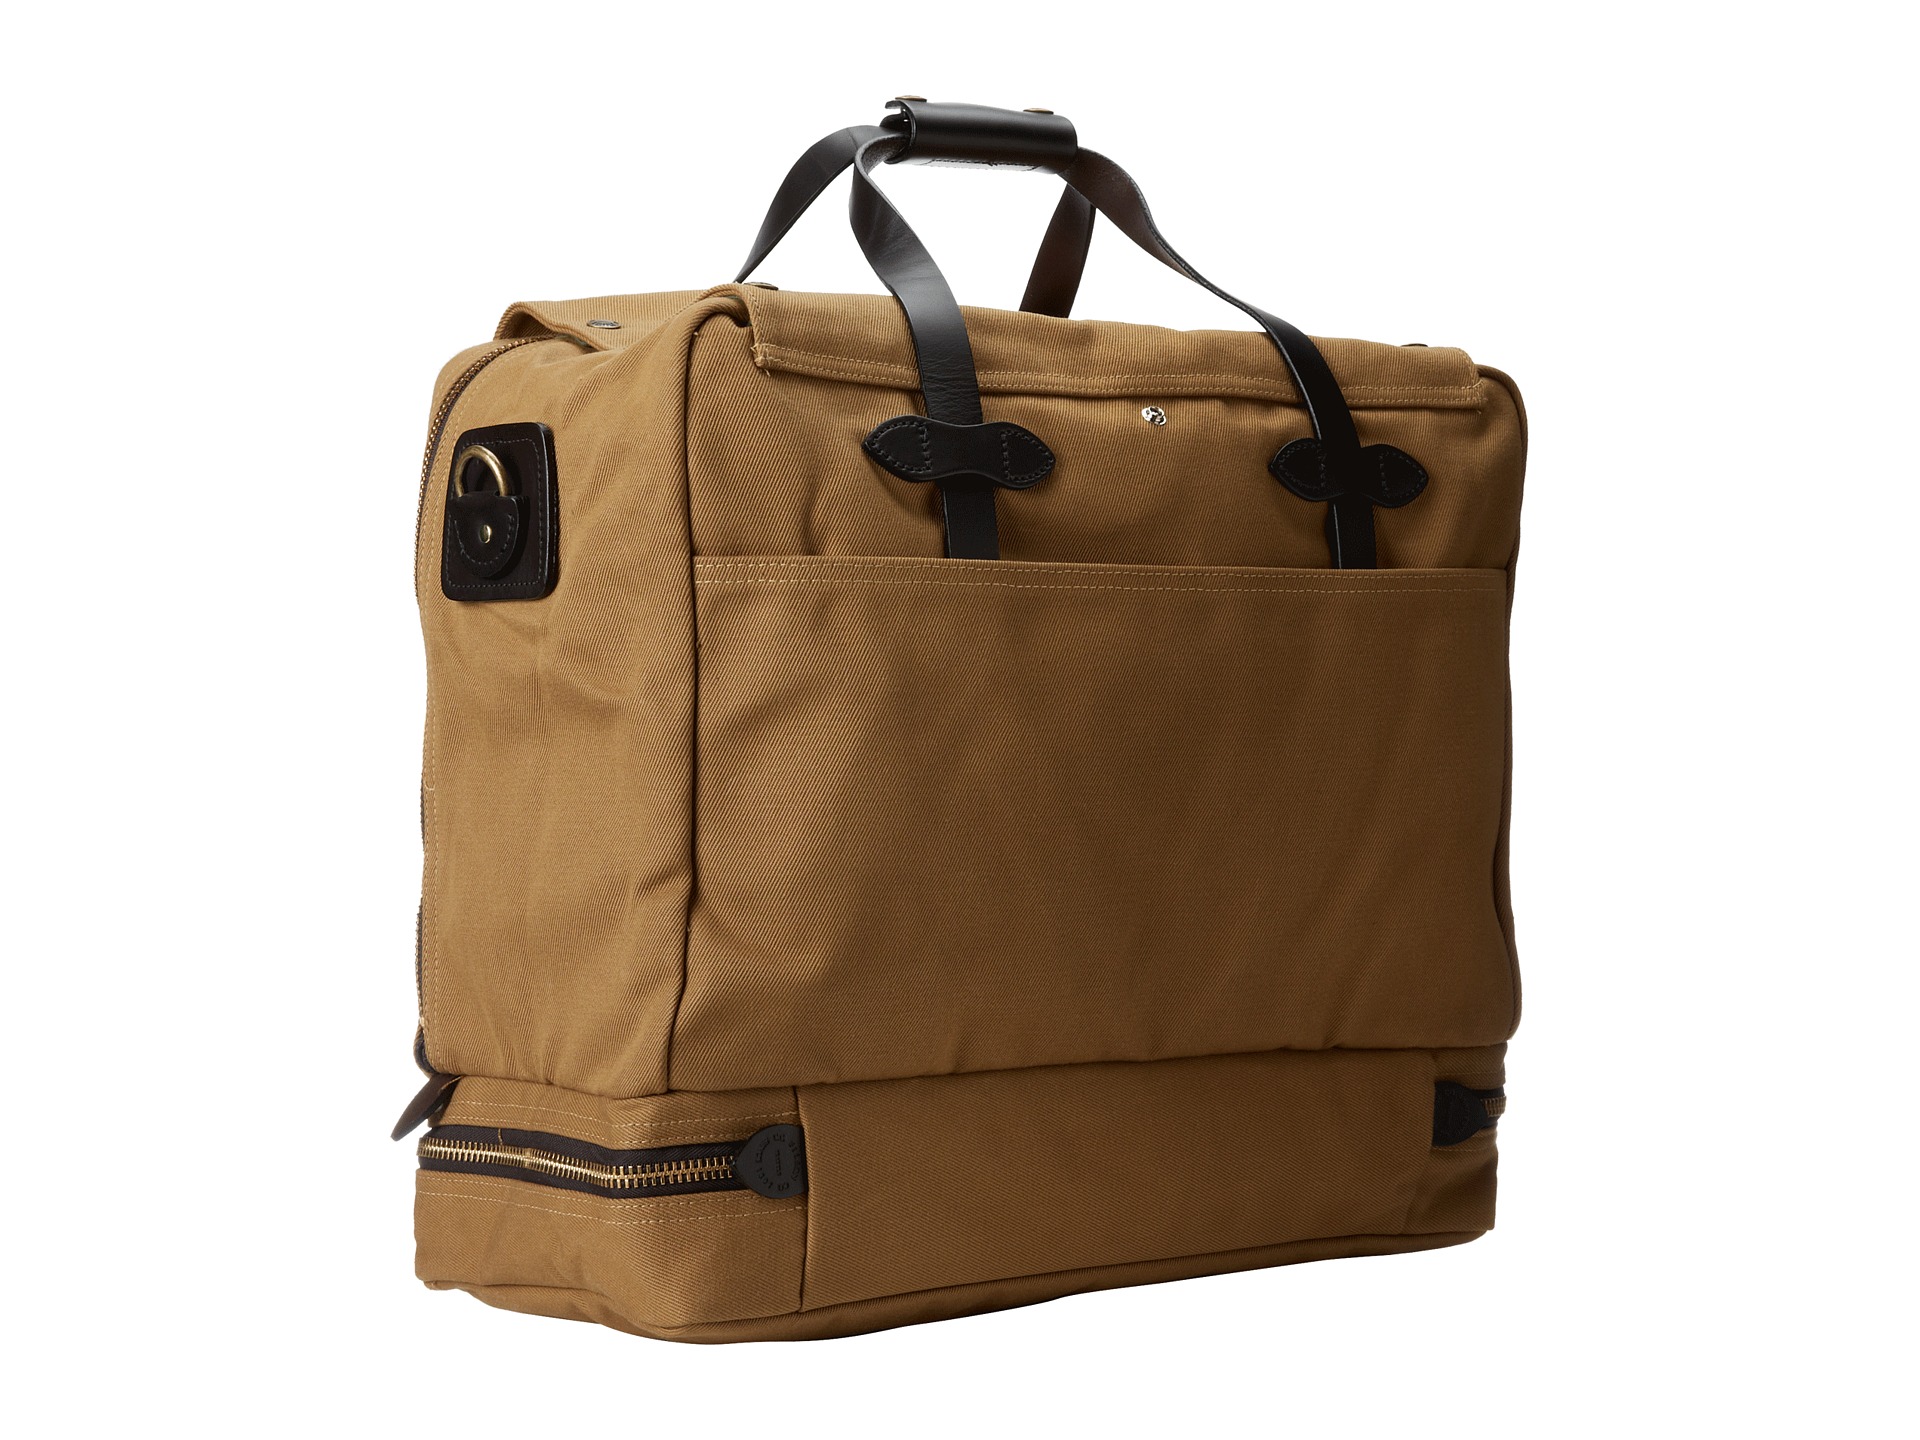 Filson Outfitter Travel Bag - Zappos.com Free Shipping BOTH Ways